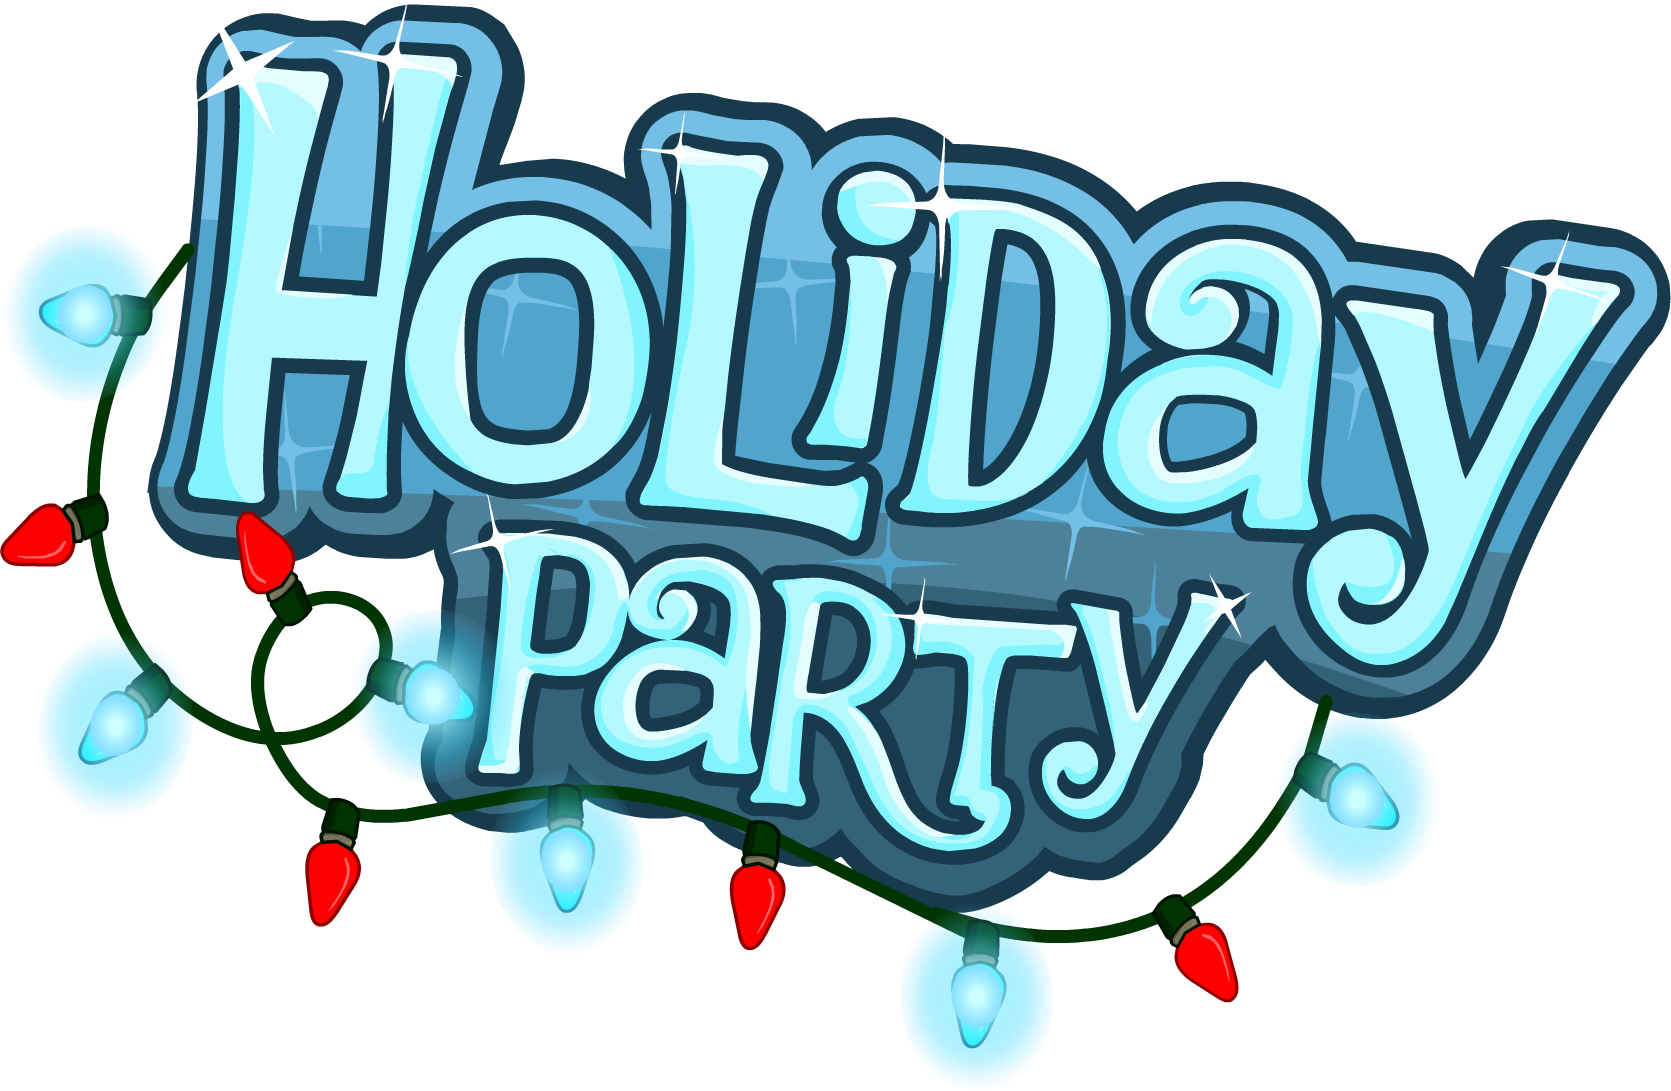 Midway Woods Holiday Party graphic